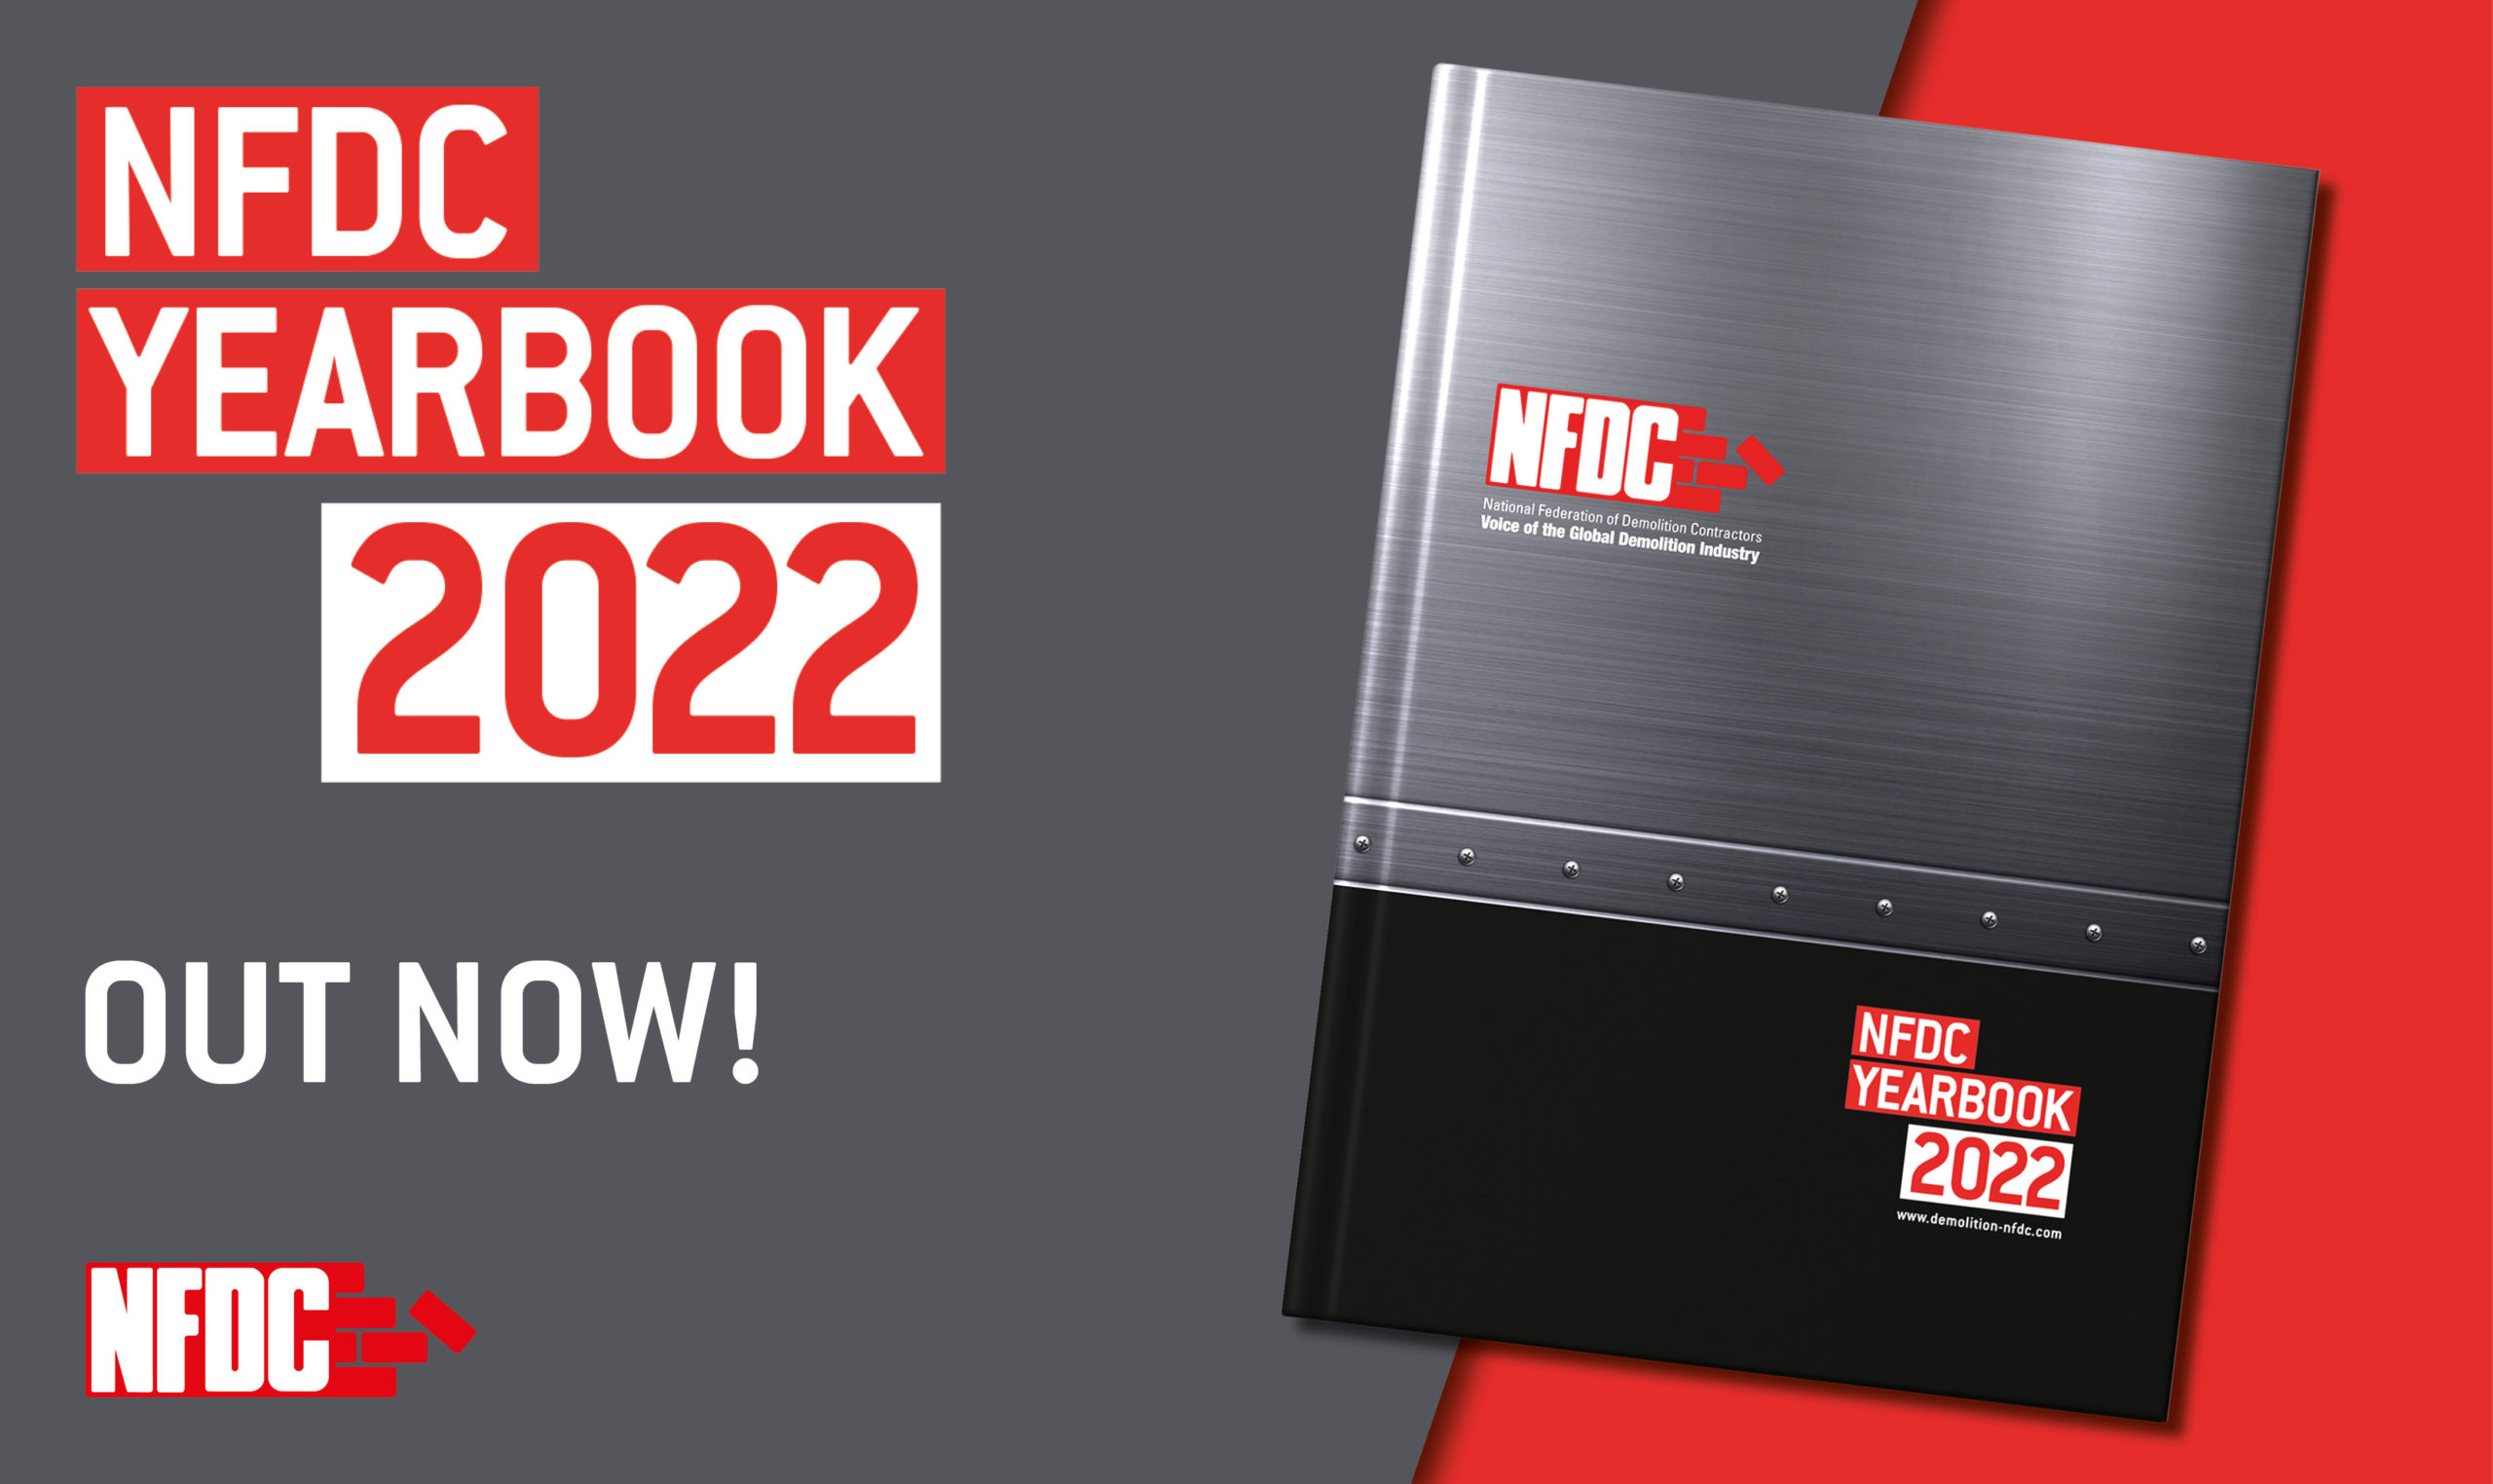 NFDC Yearbook 2022 – Out Now!